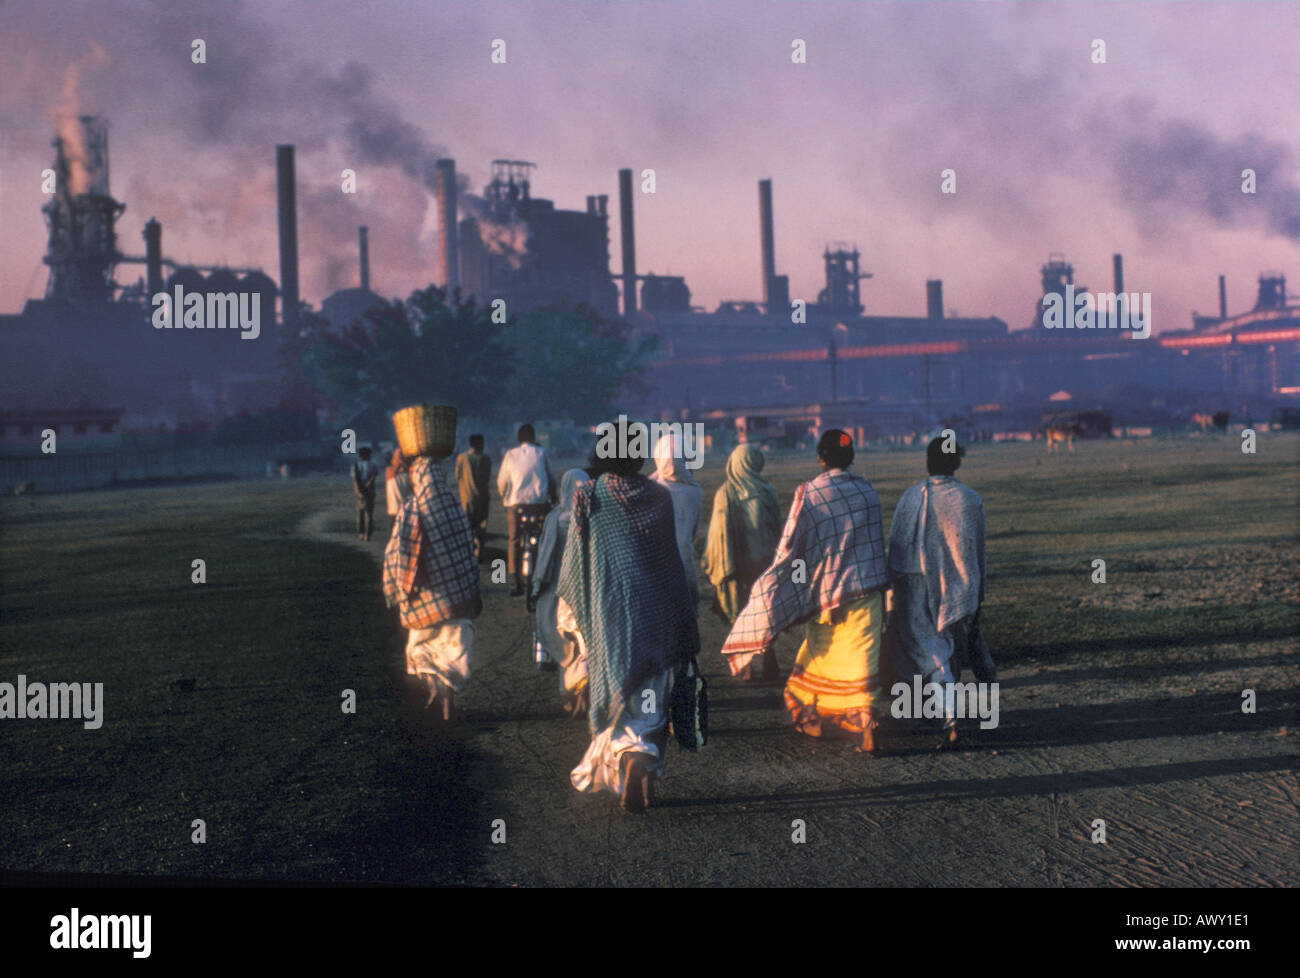 India women in saris going to work at industrial power plant polluting the sky with smoke at sunrise Stock Photo